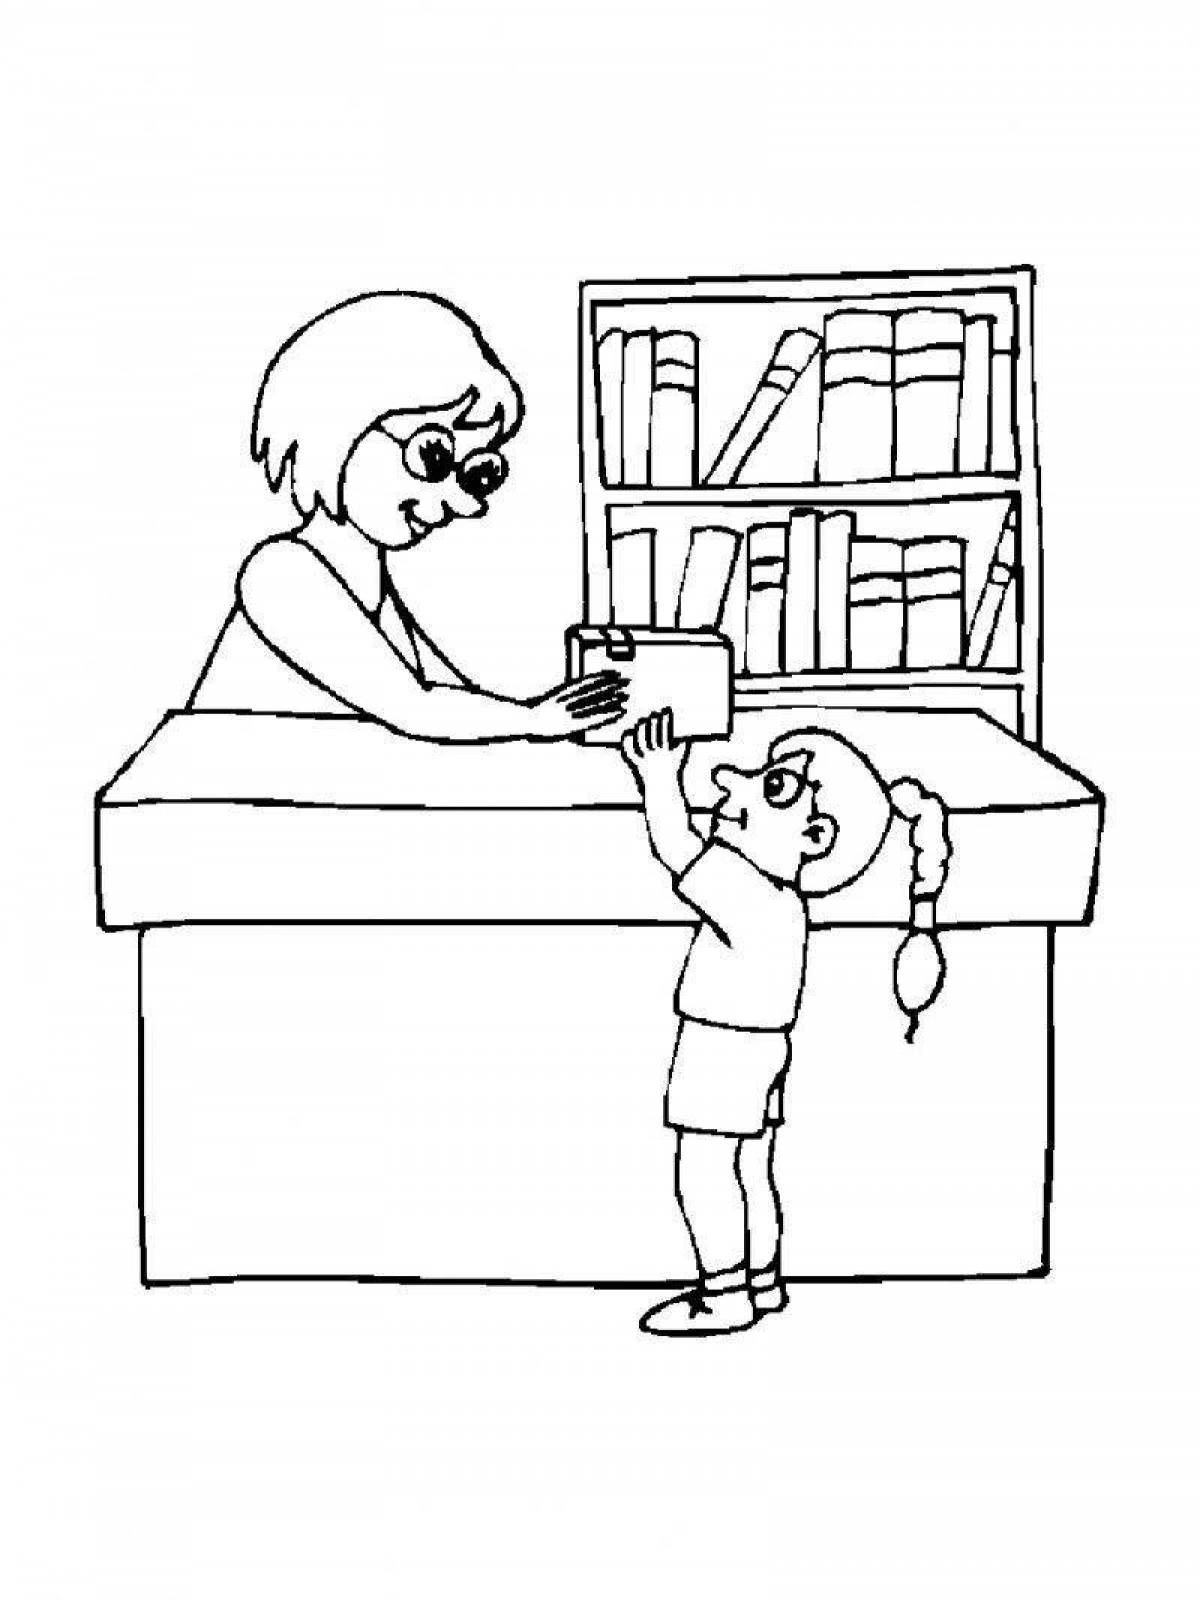 Colorful library coloring page